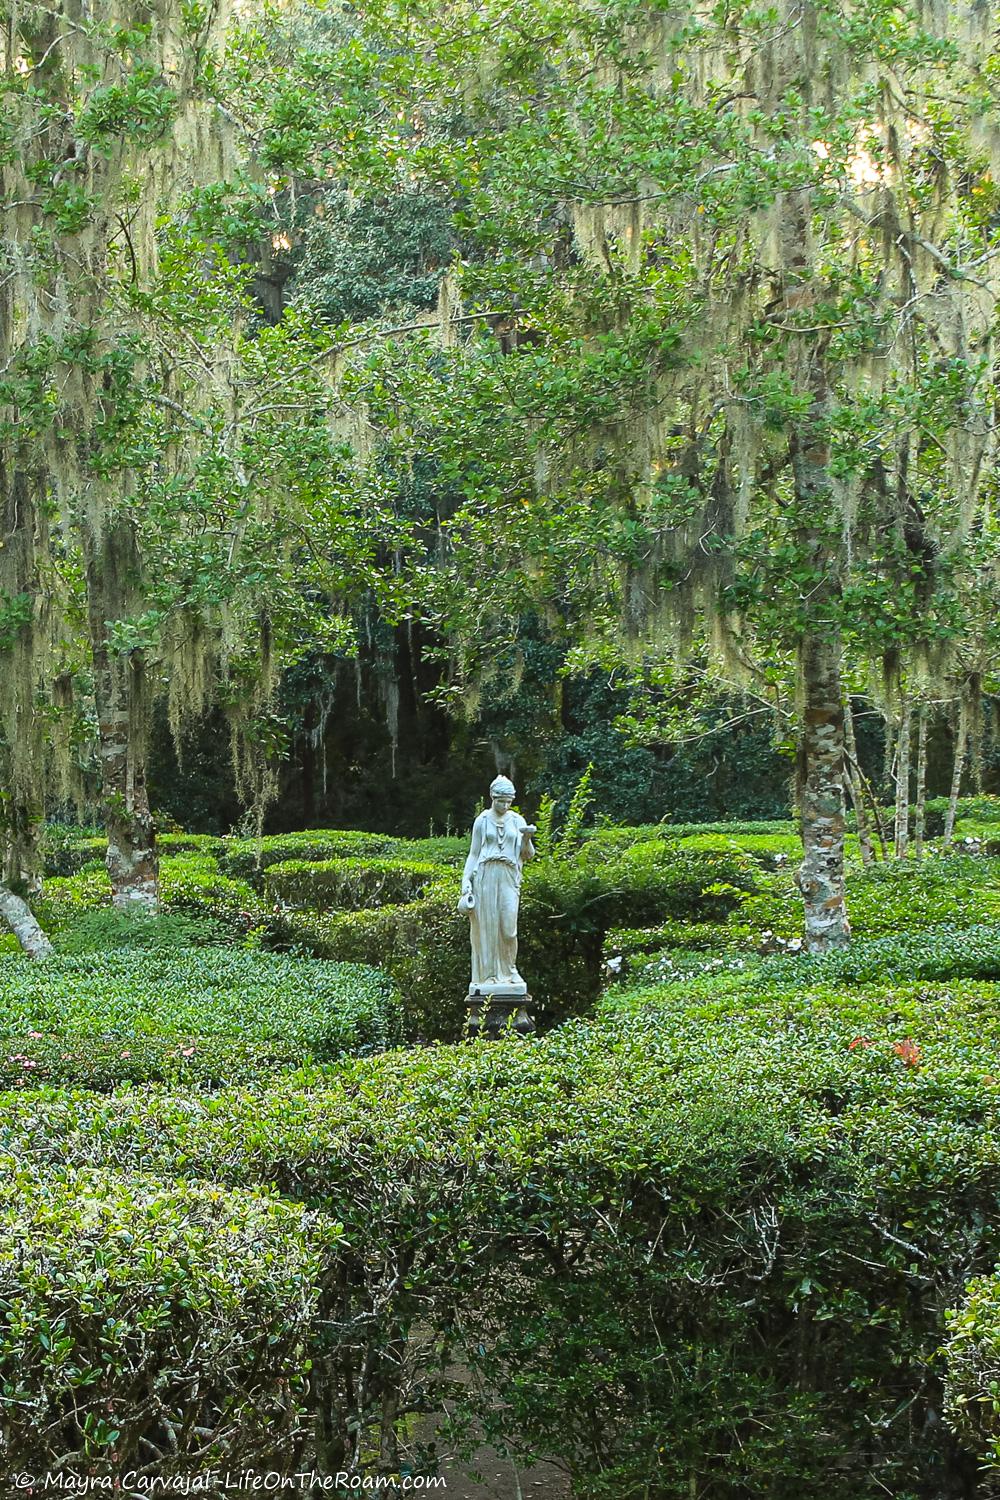 A maze made of hedges with a statue in the centre